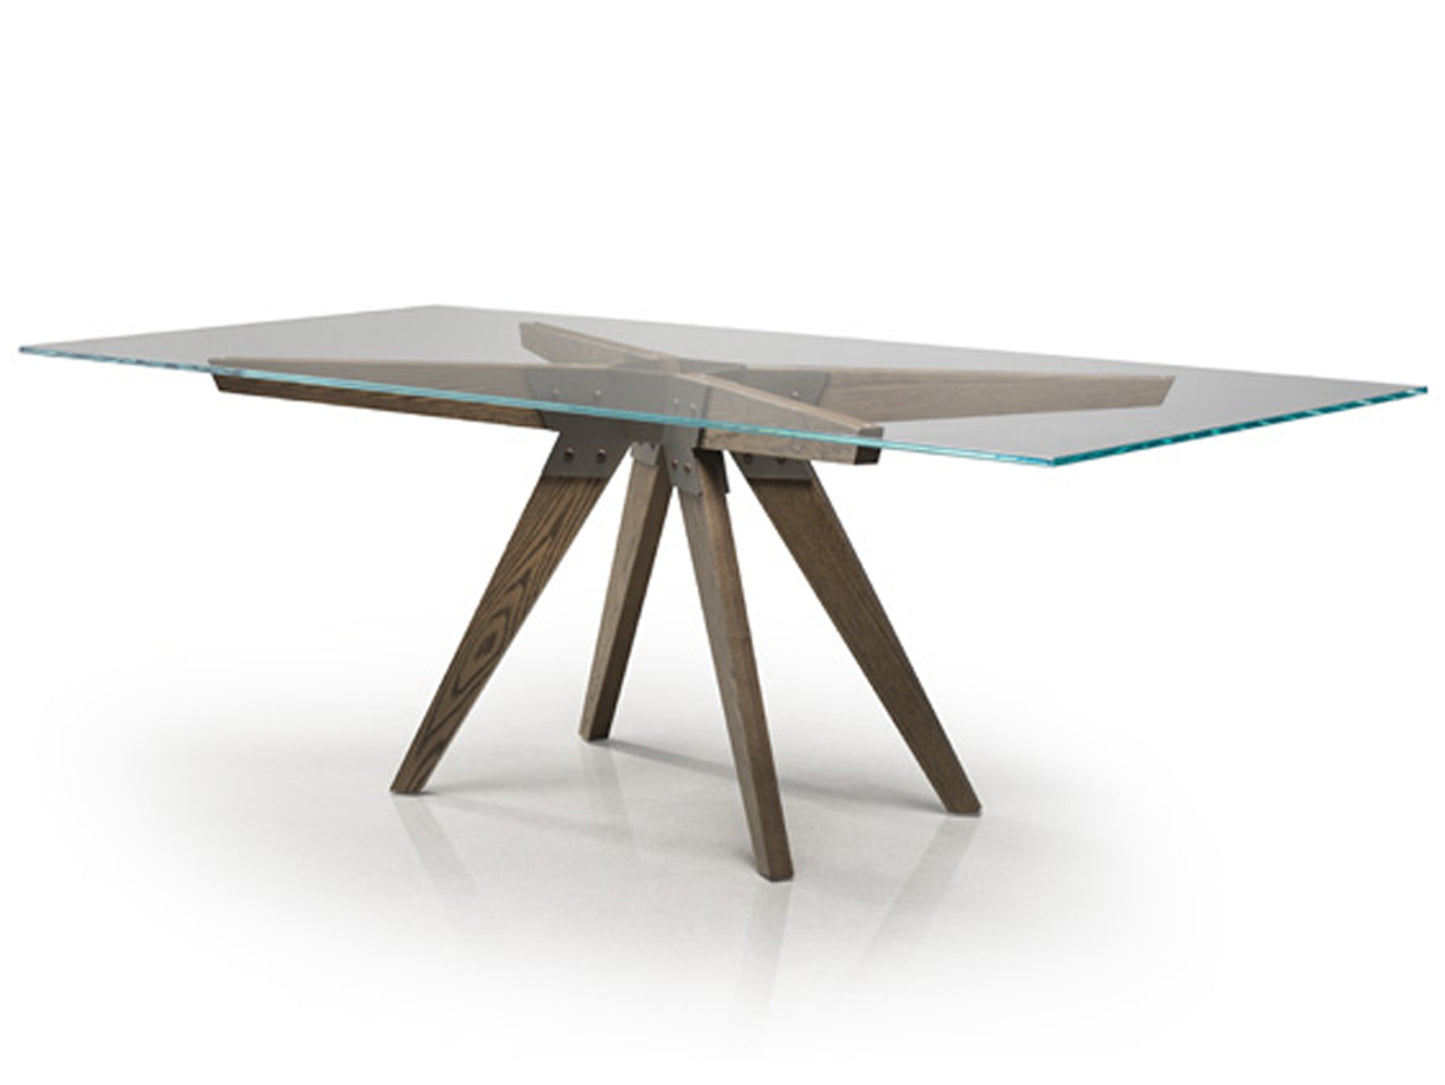 Soul table - solid wood, welded steel, glass top, Canadian made